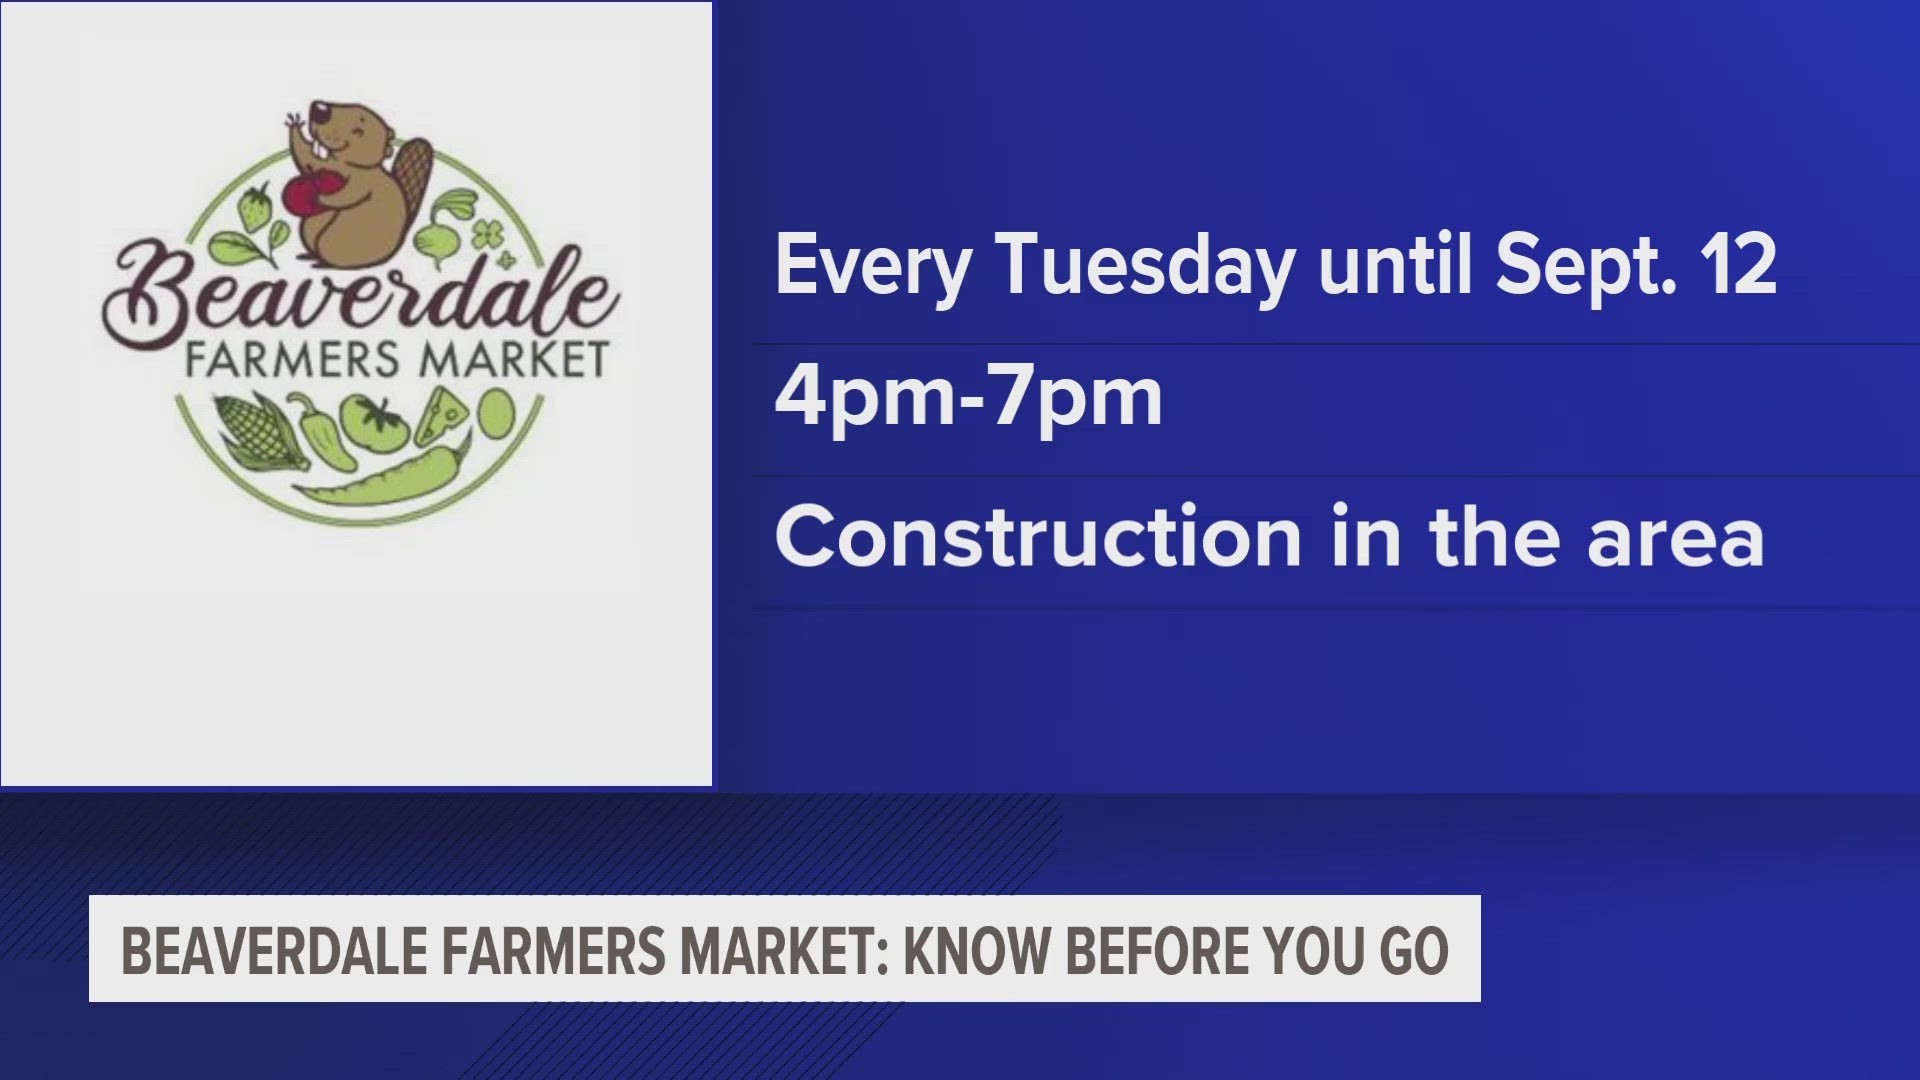 The Beaverdale Farmers Market is every Tuesday through September 12.